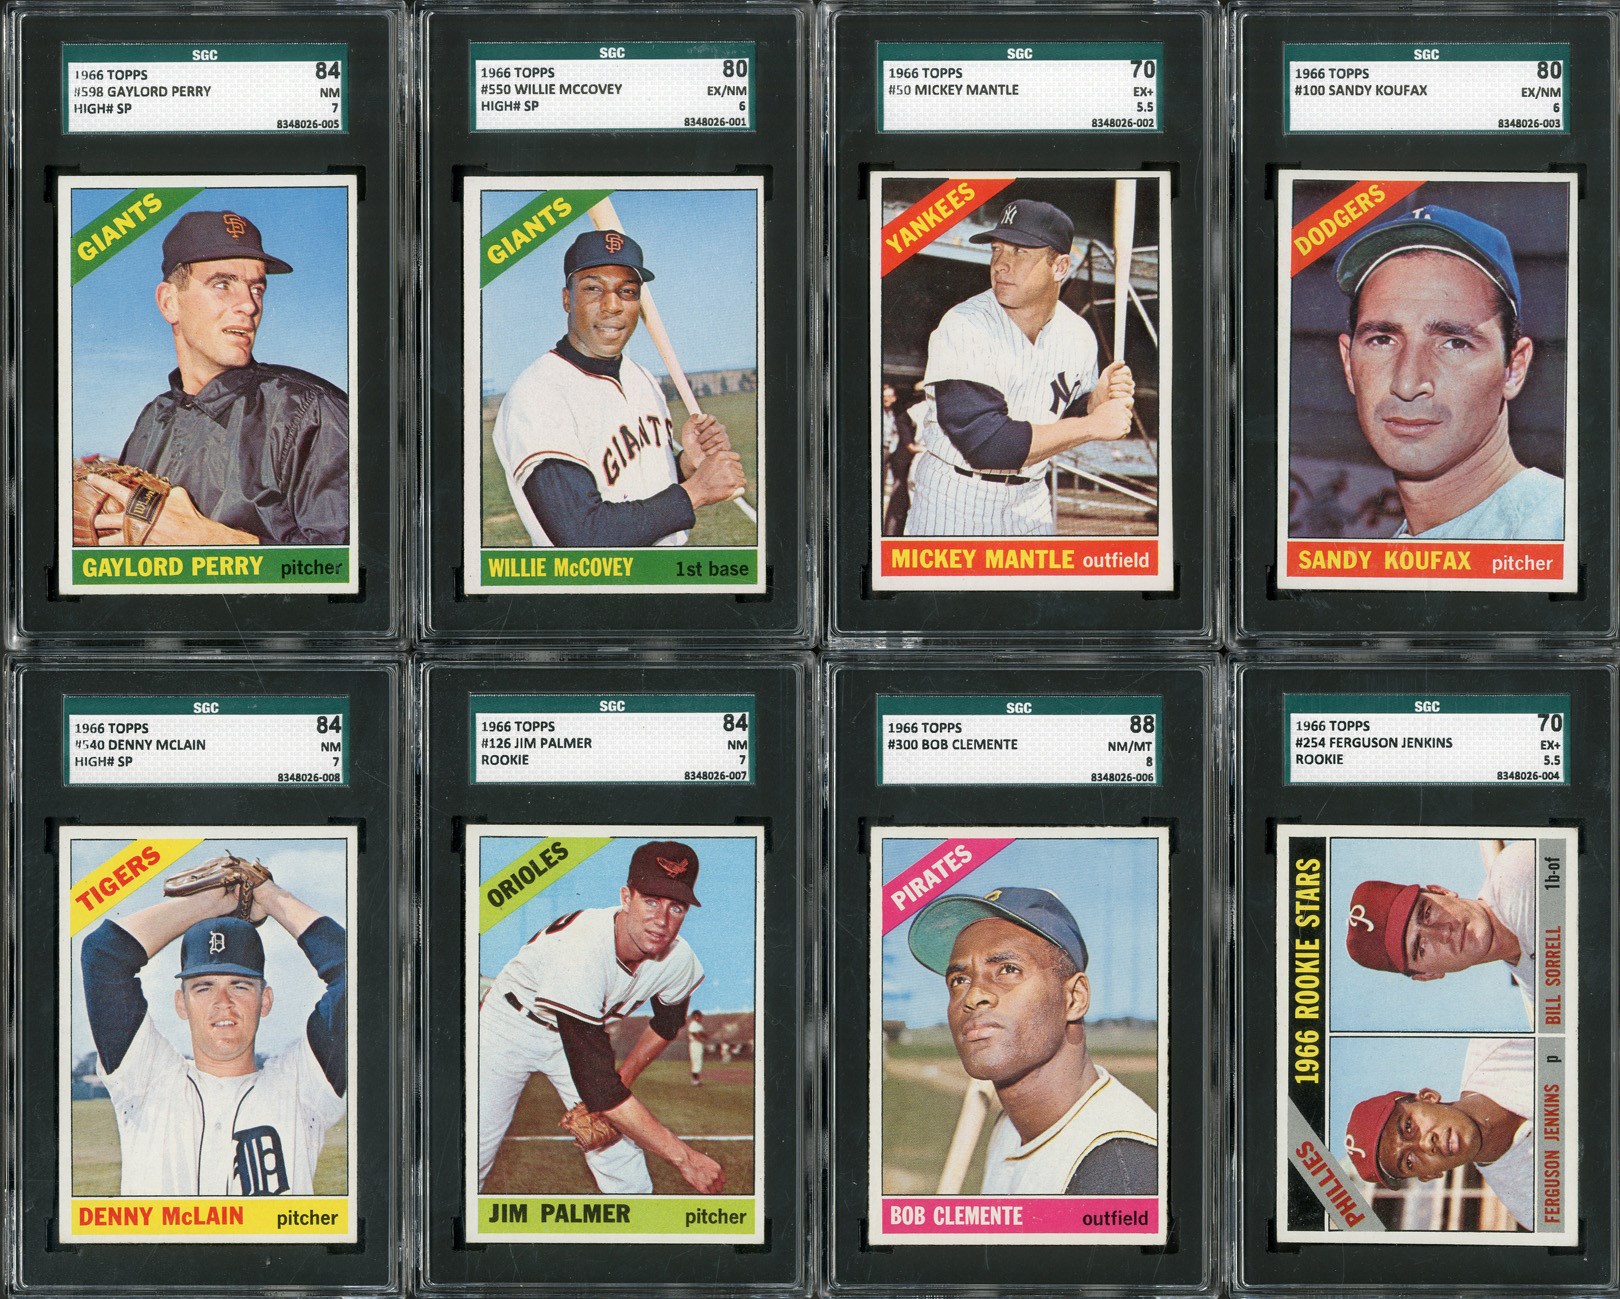 - 1966 Topps Complete Set (598 Cards - 8 SGC Graded)